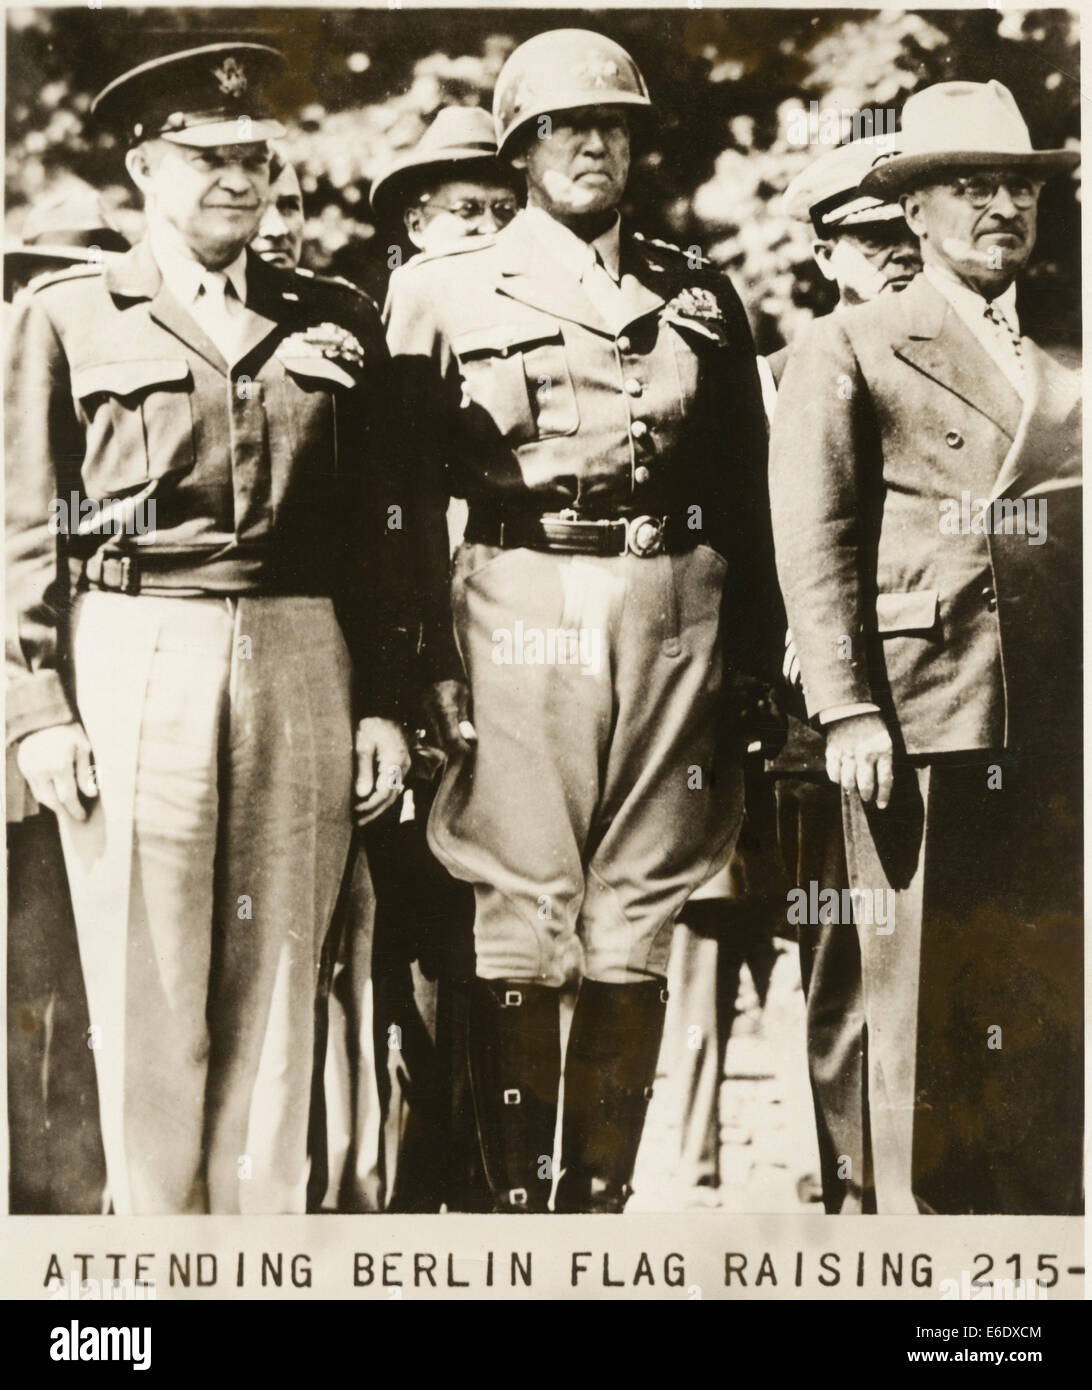 General Dwight Eisenhower, General George Patton and U.S. President Harry S. Truman Attending Liberation Flag Raising Ceremony, Stock Photo